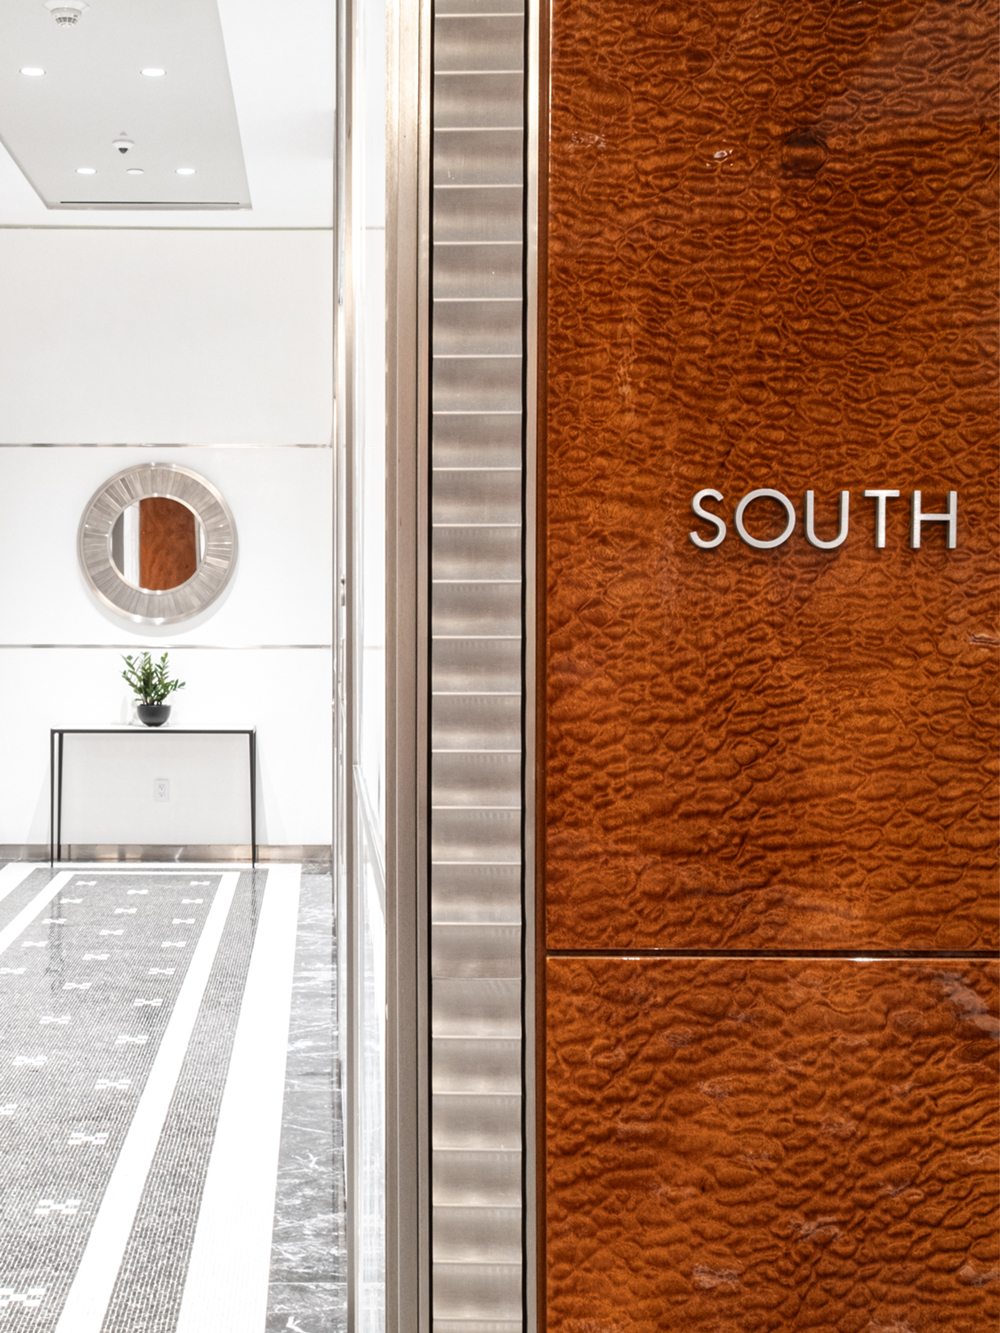 Detail shot of elevator lobby, focusing on metal signage that reads "SOUTH"